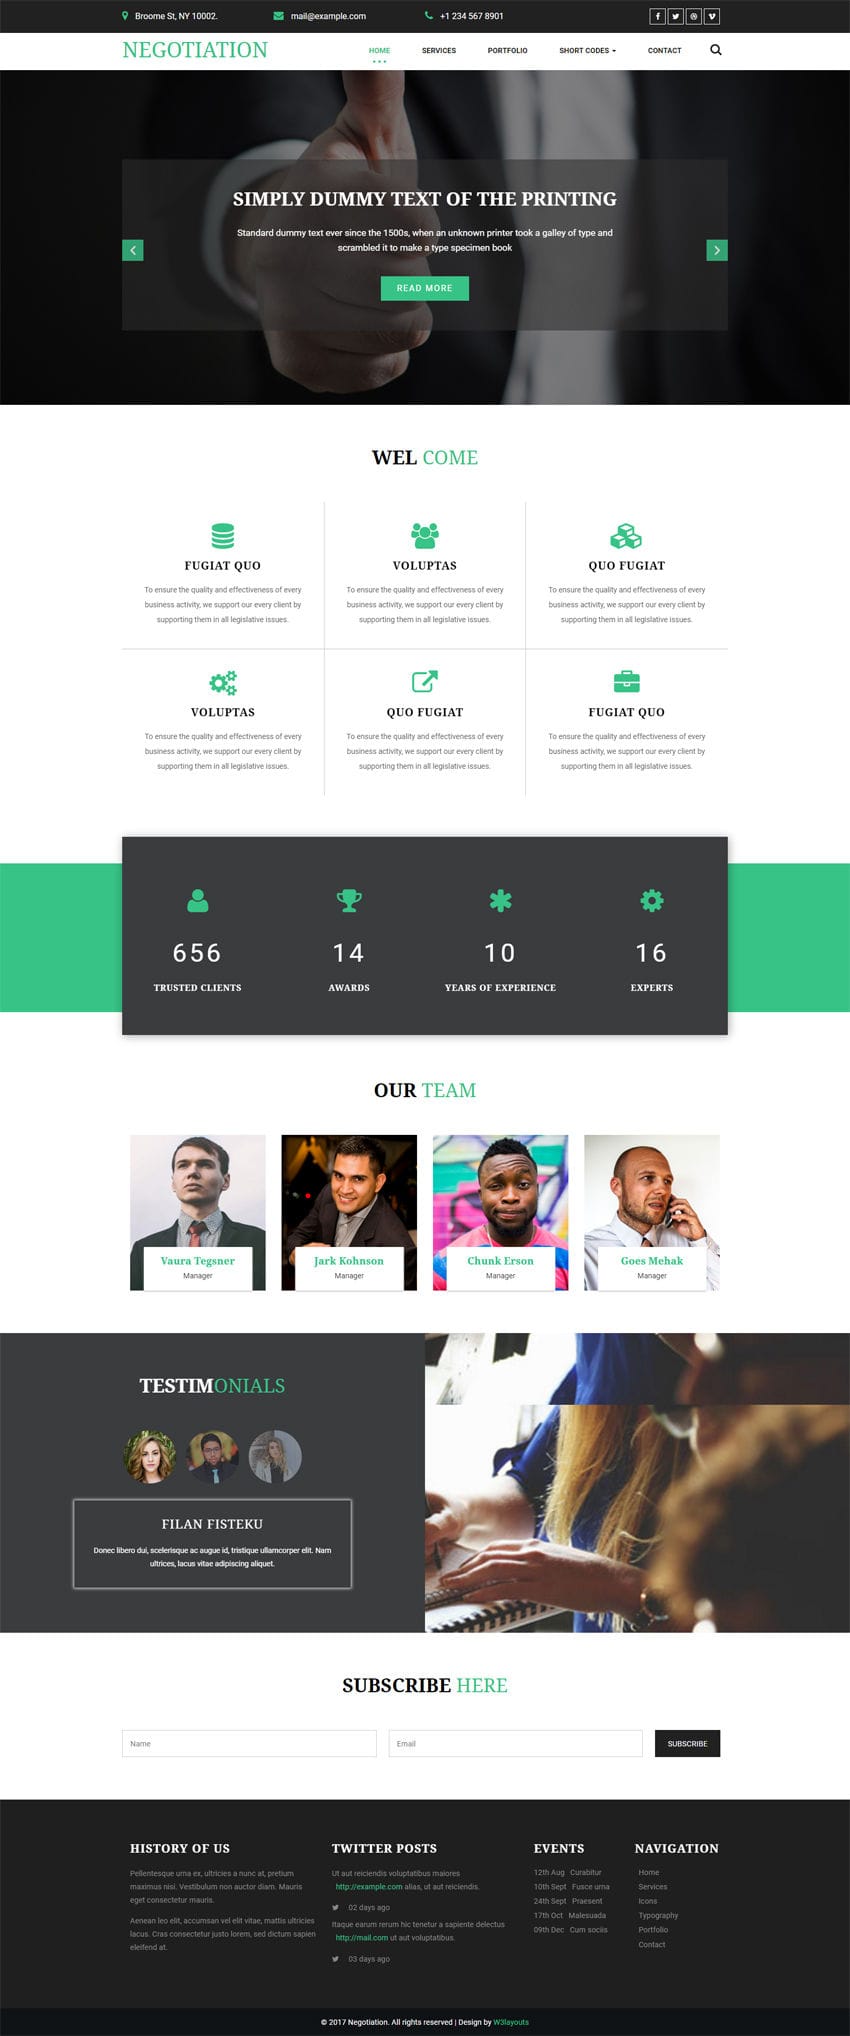 Negotiation a Corporate Category Bootstrap Responsive Web Template